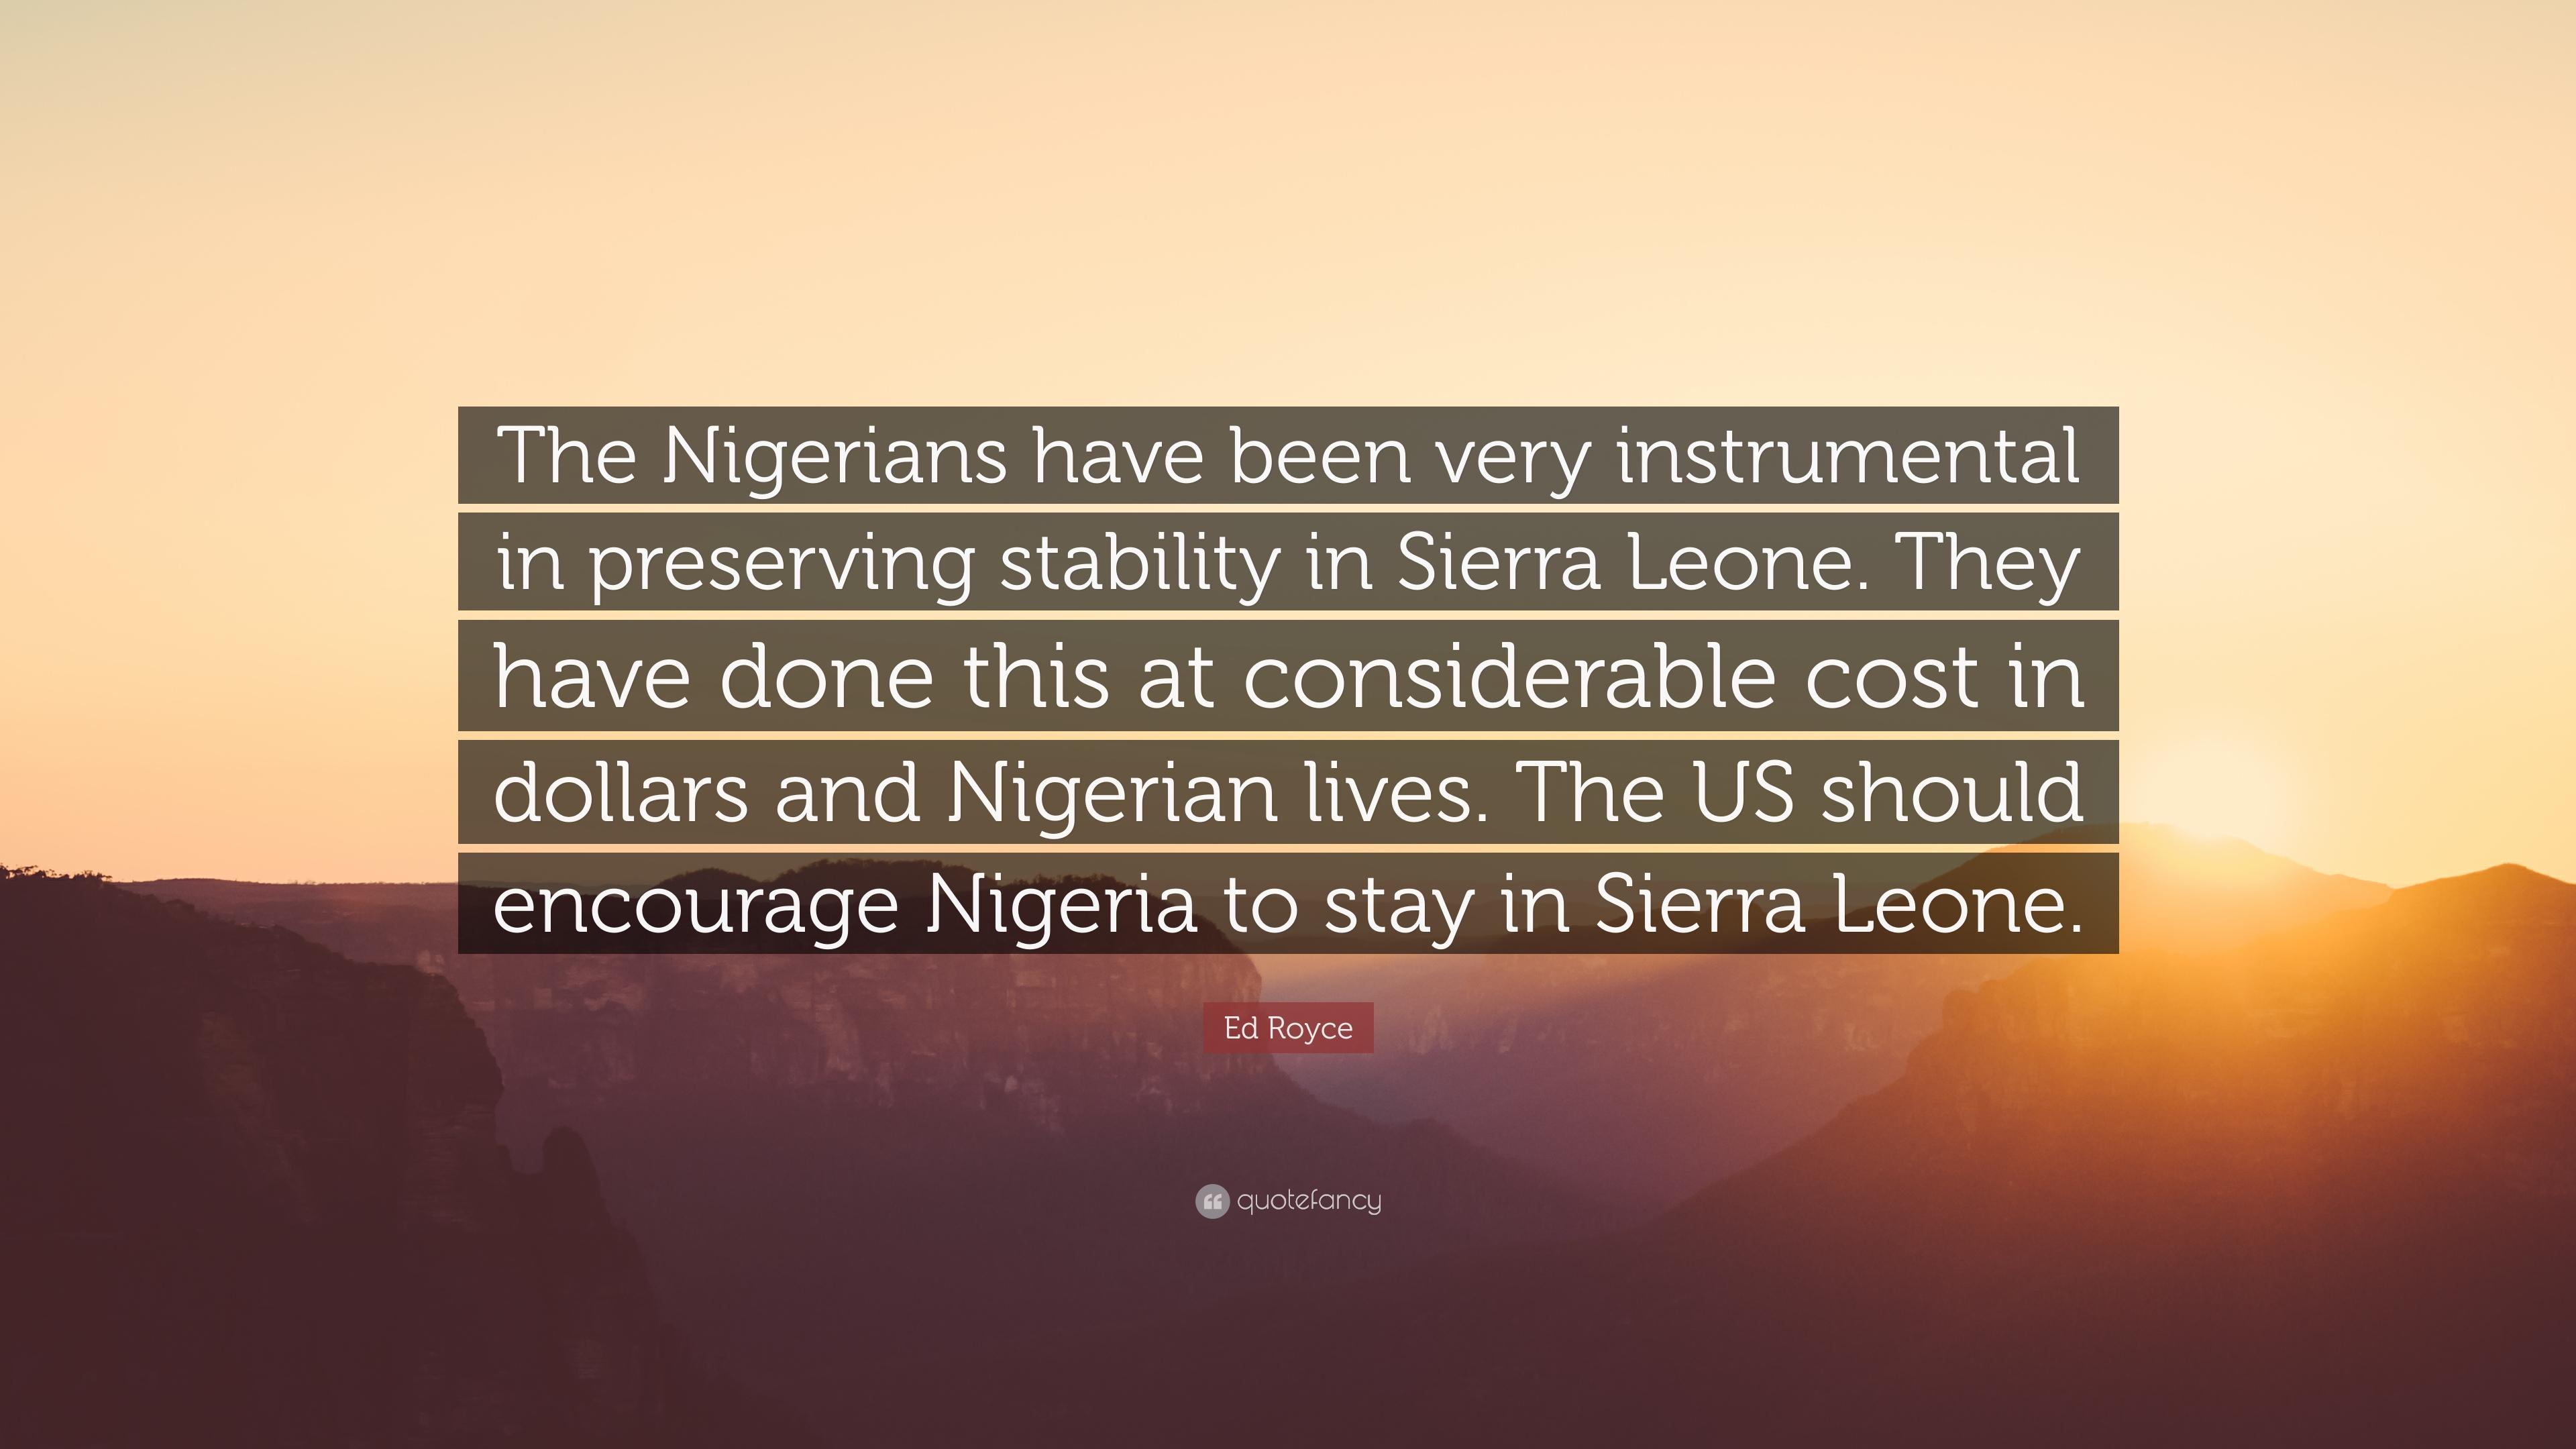 Ed Royce Quote: “The Nigerians have been very instrumental